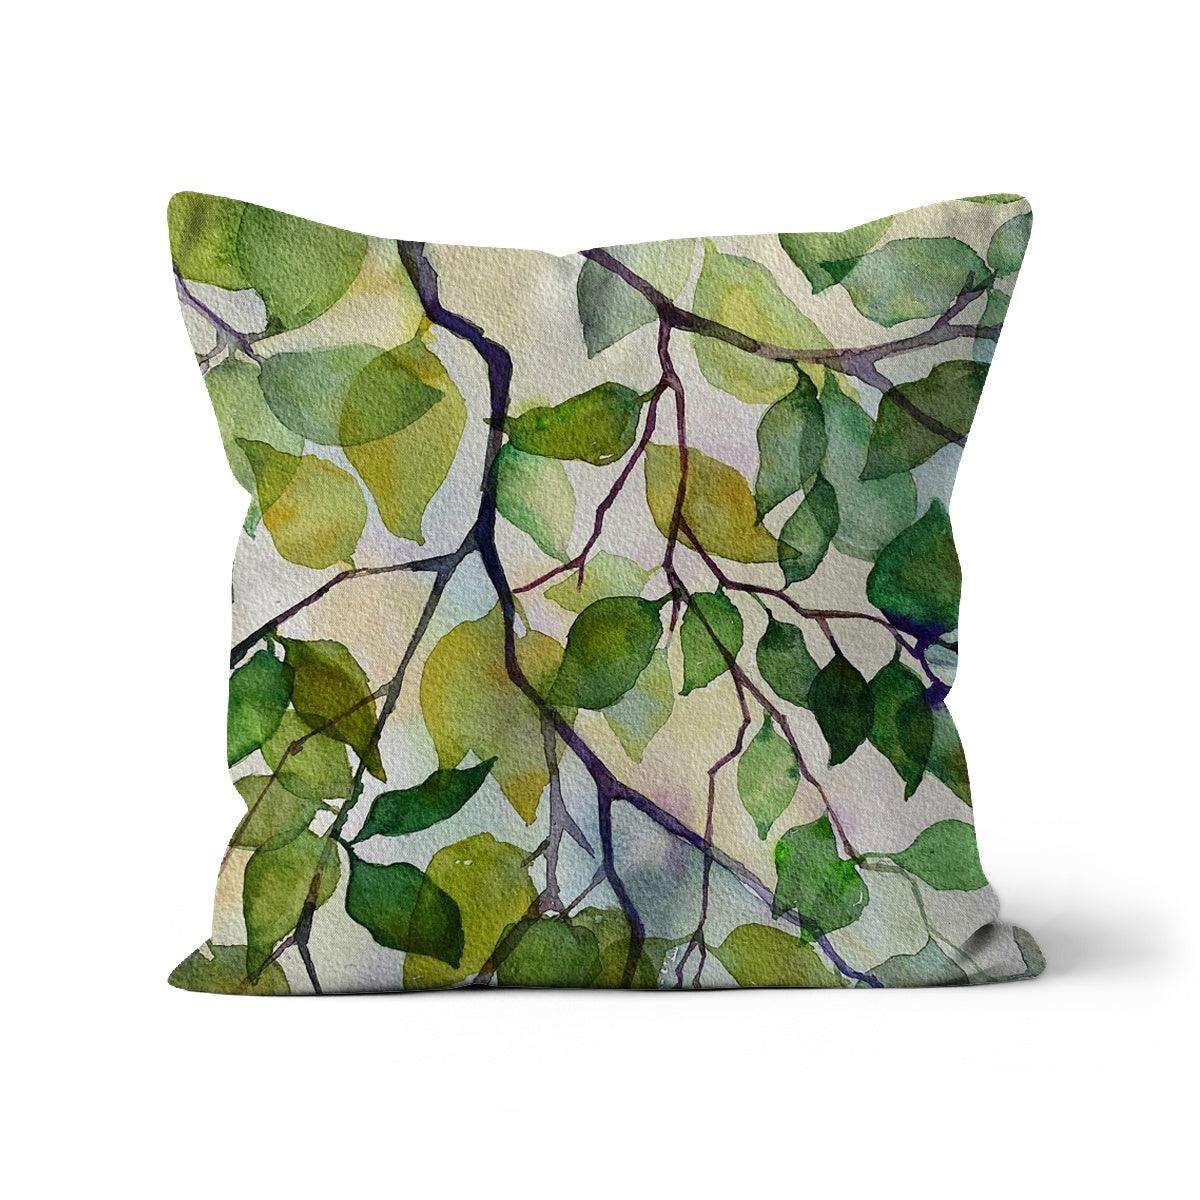 Song of the Trees Cushion - Lantern Space